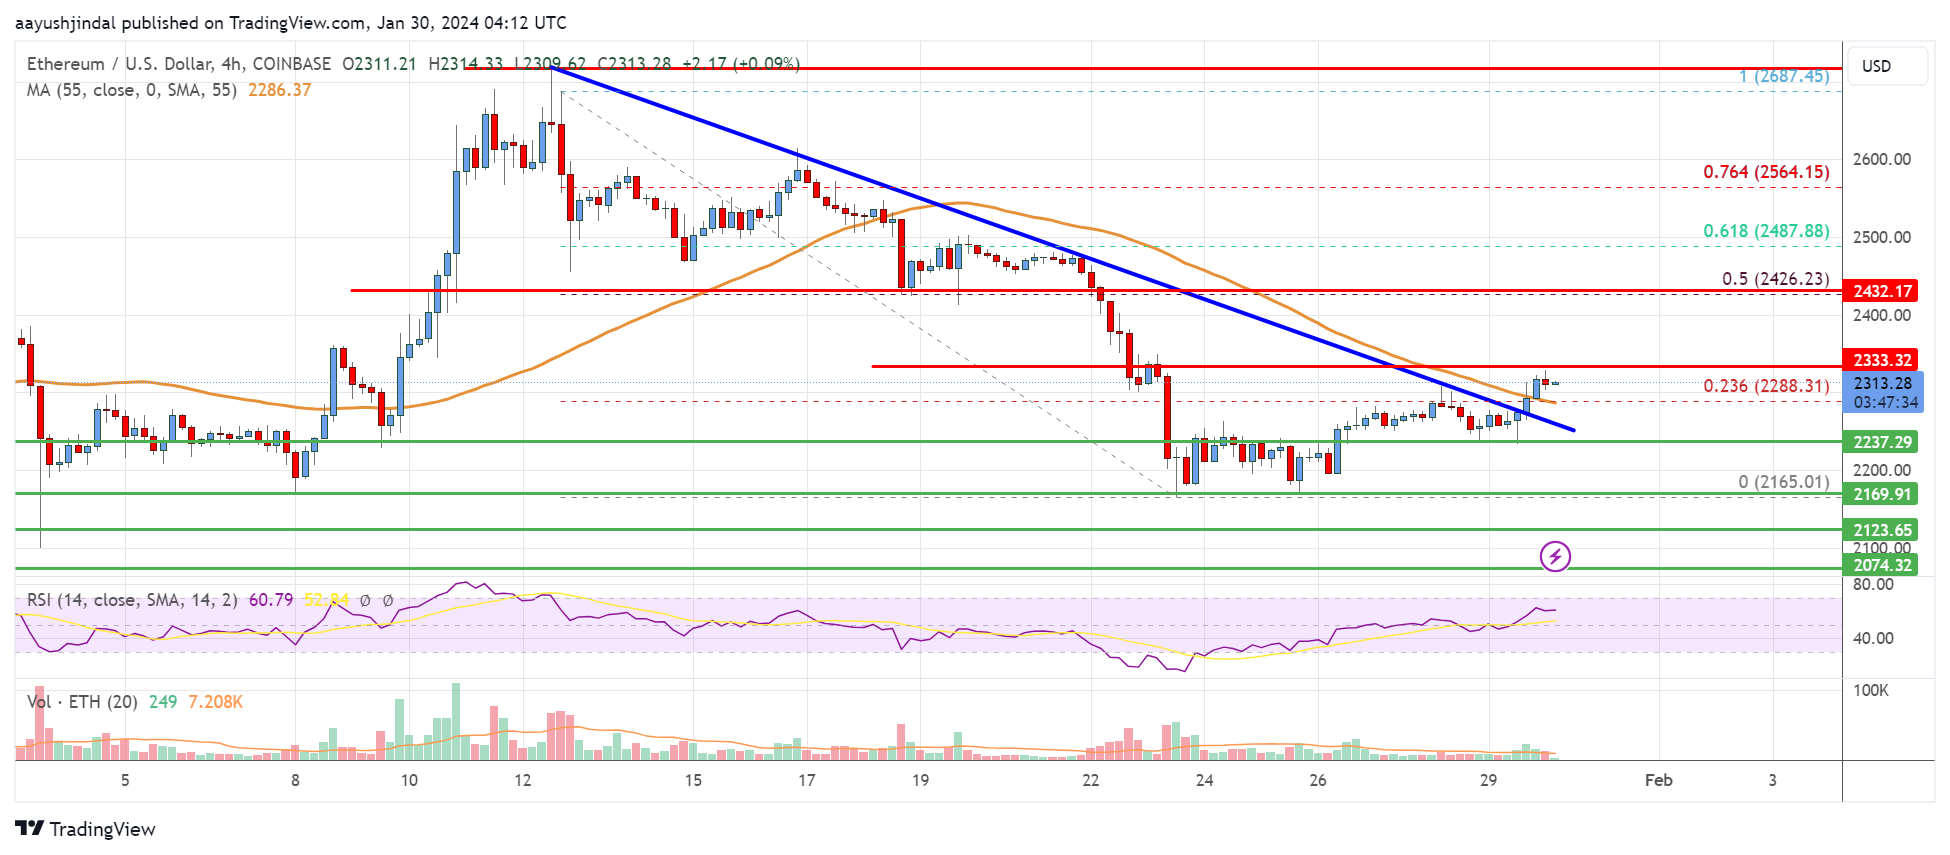 Ethereum (ETH) Technical Analysis Daily, Ethereum Price Forecast and Reports